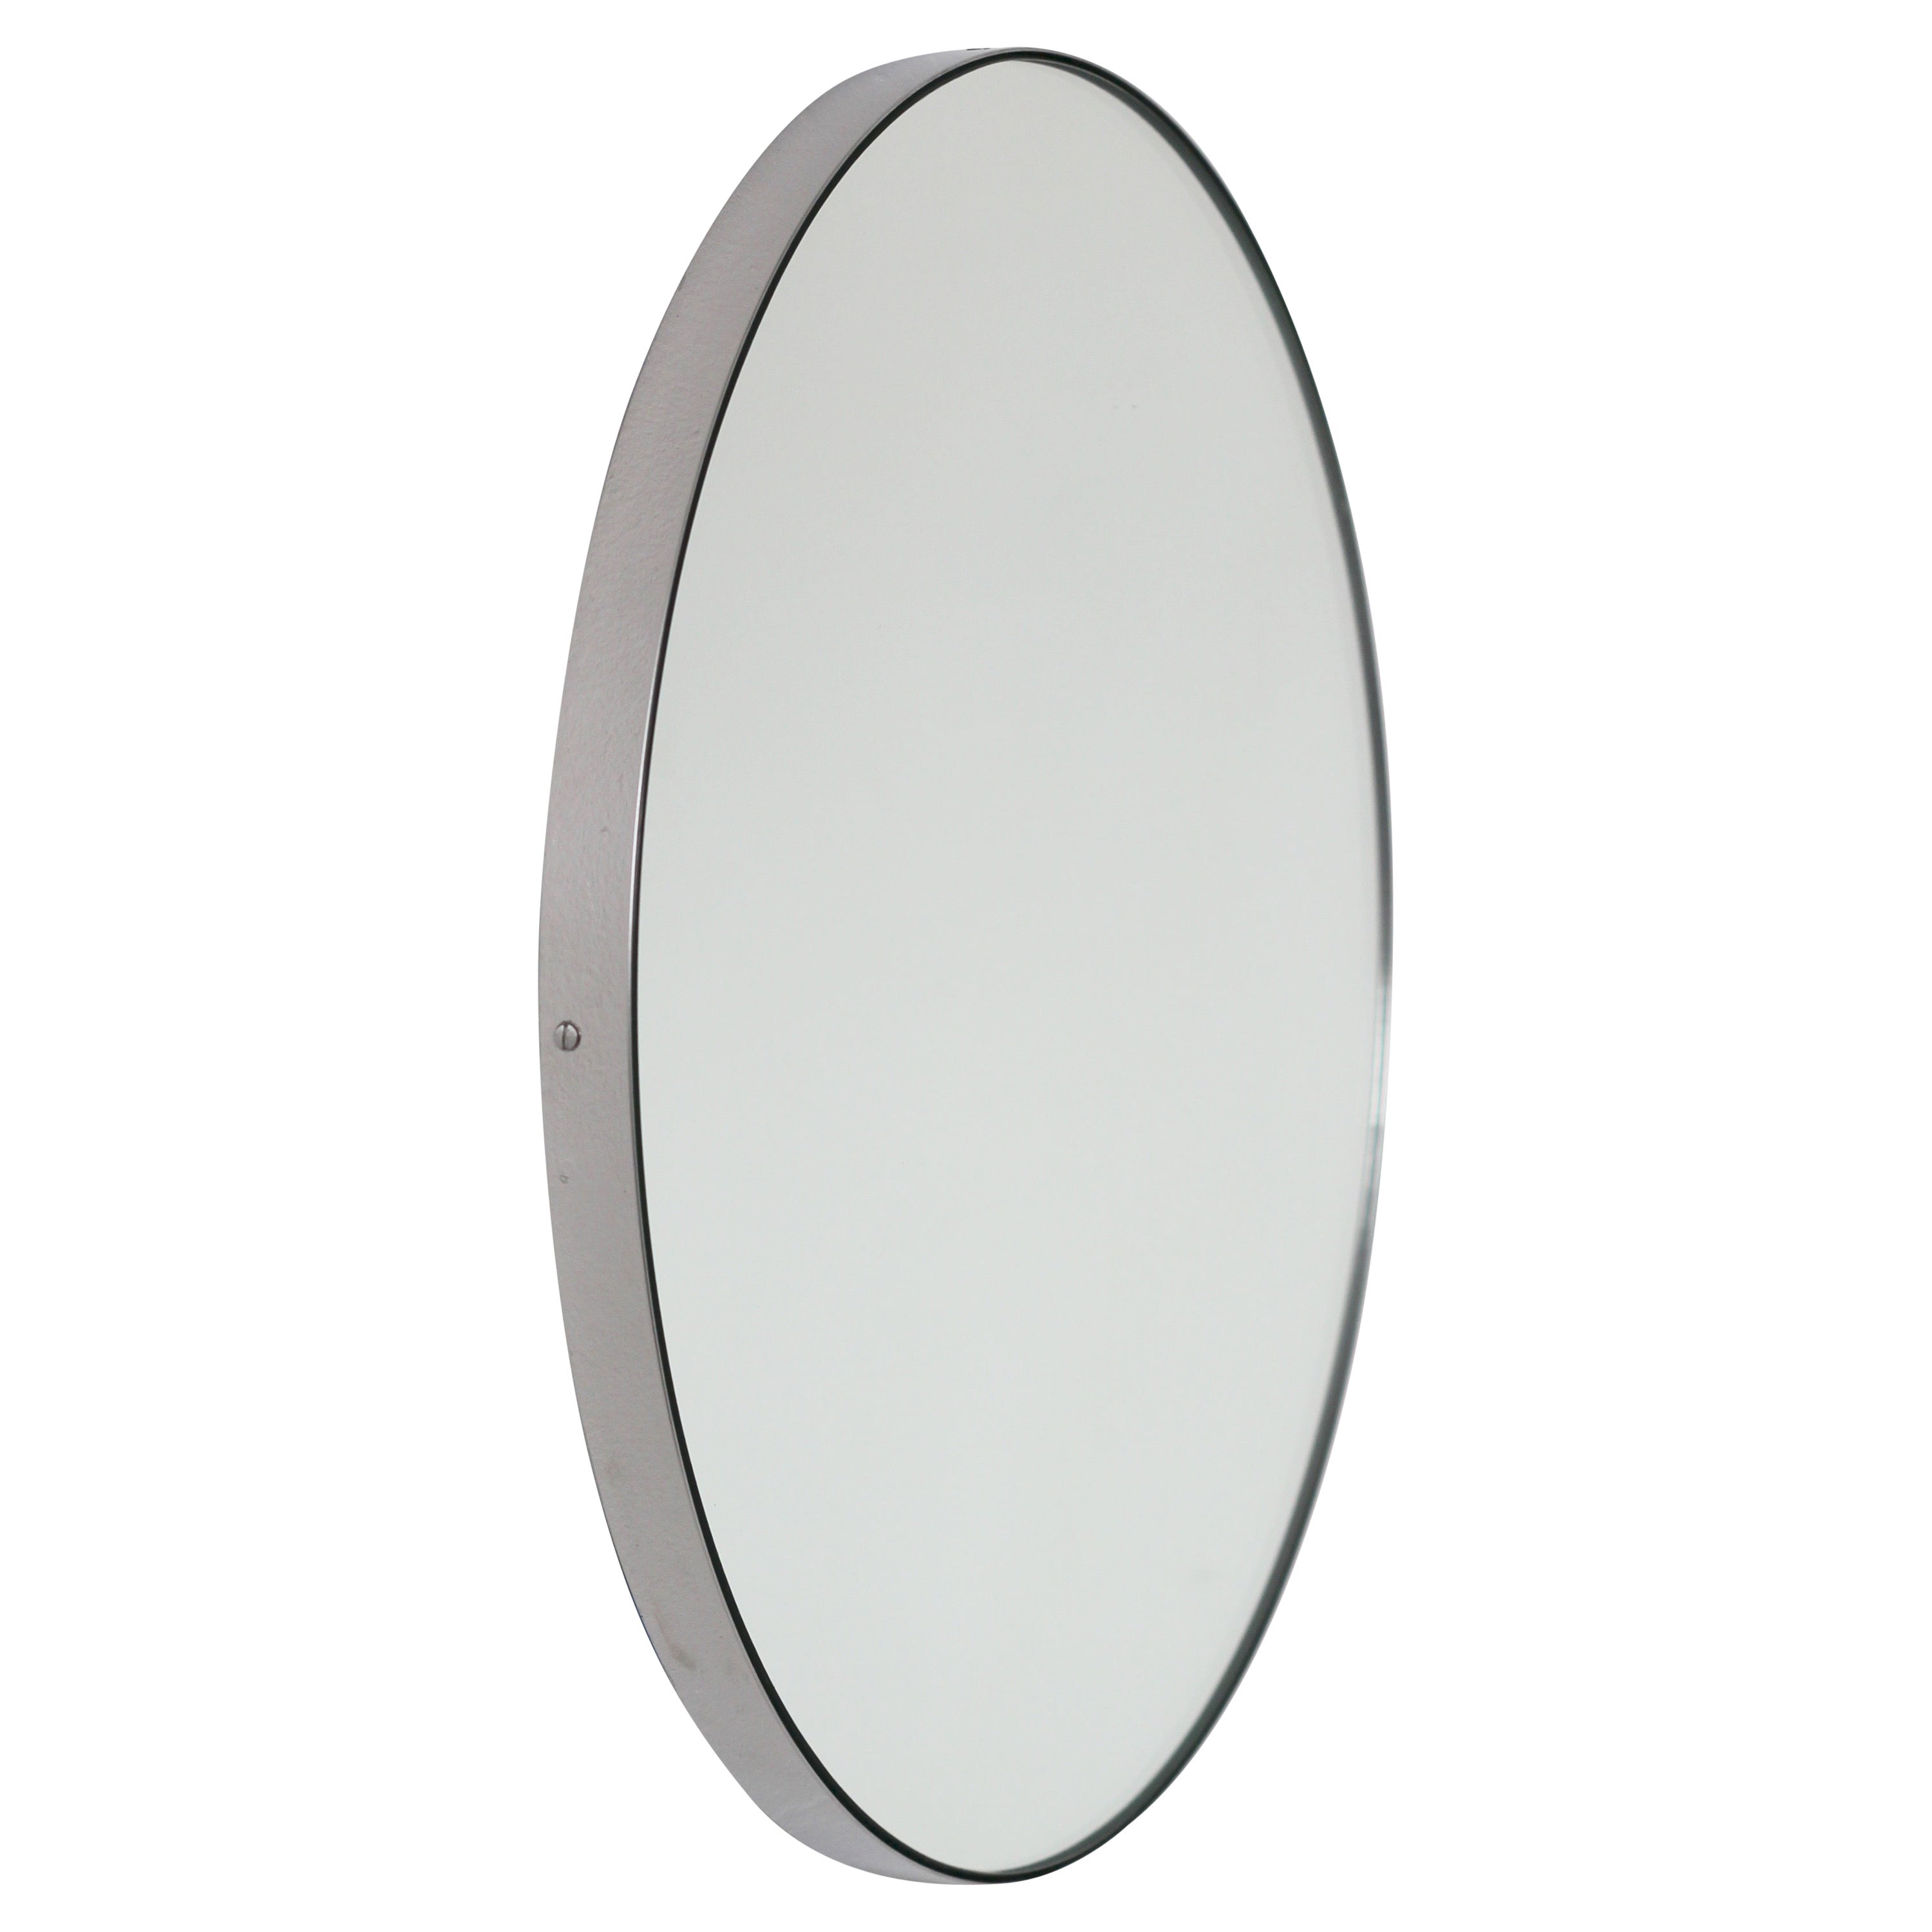 Orbis Round Handcrafted Mirror with Stainless Steel Frame, XL For Sale